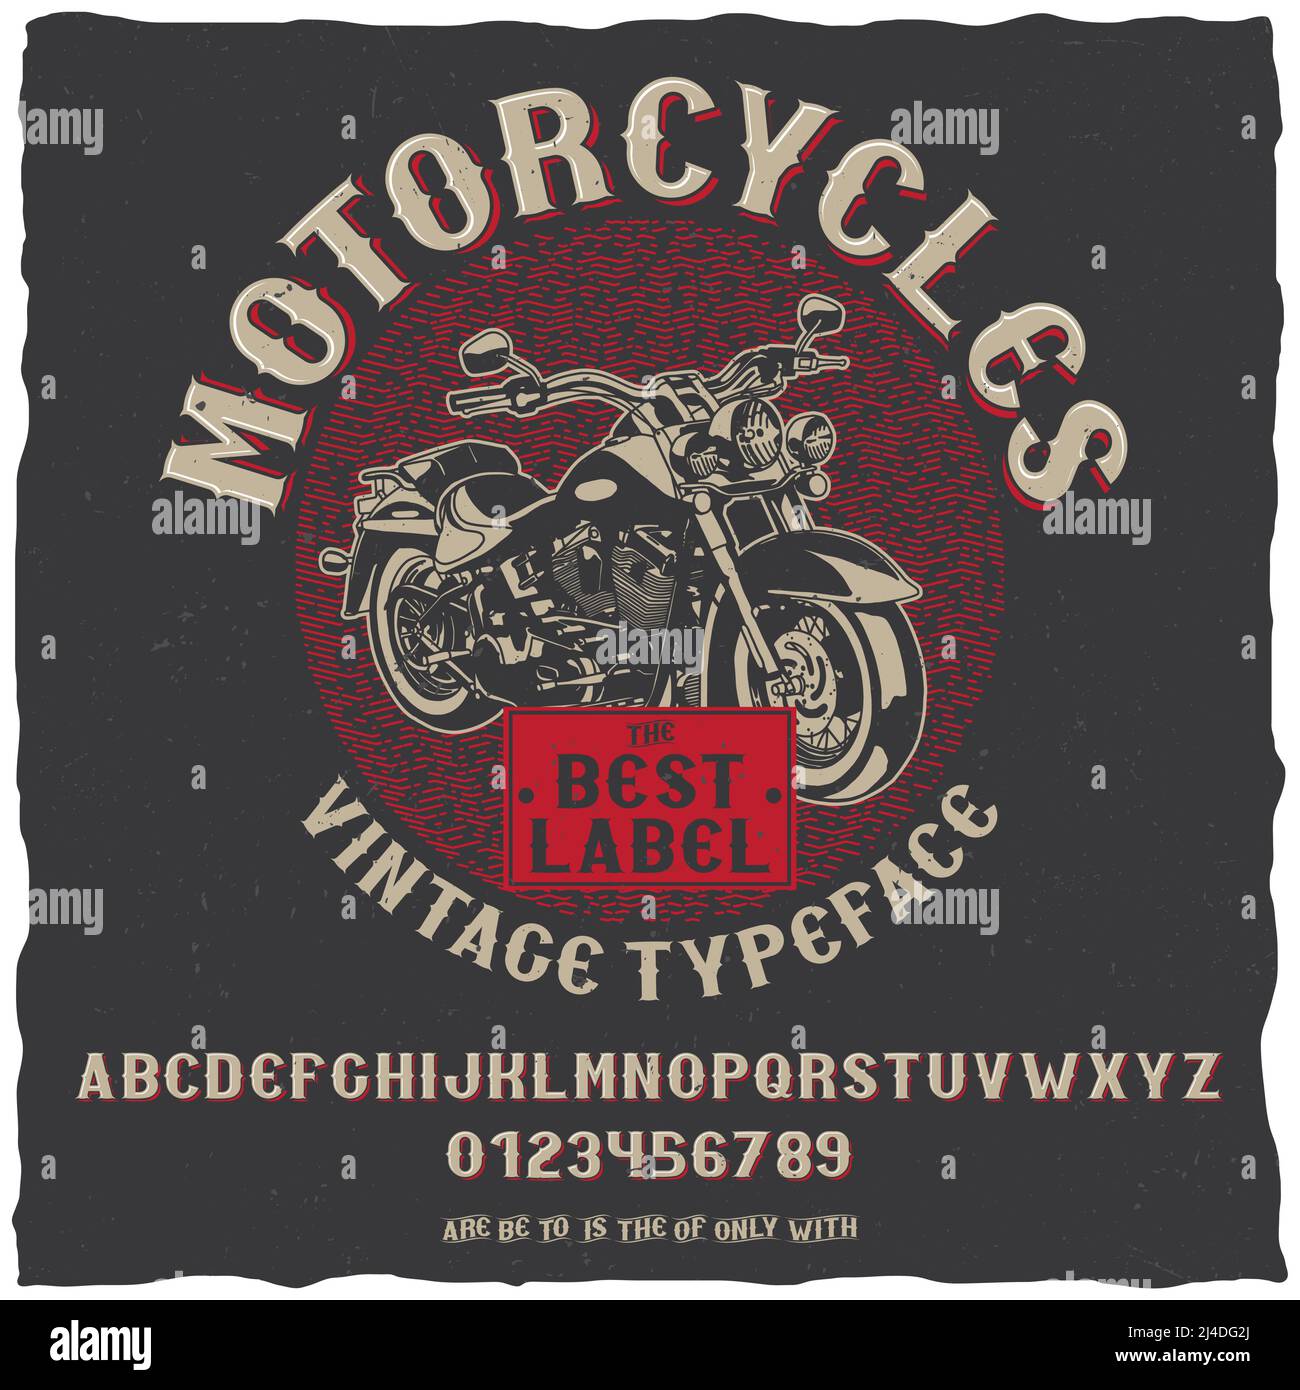 Vintage label typeface motorcycles poster with simple label design with hand drawn bike vector illustration Stock Vector